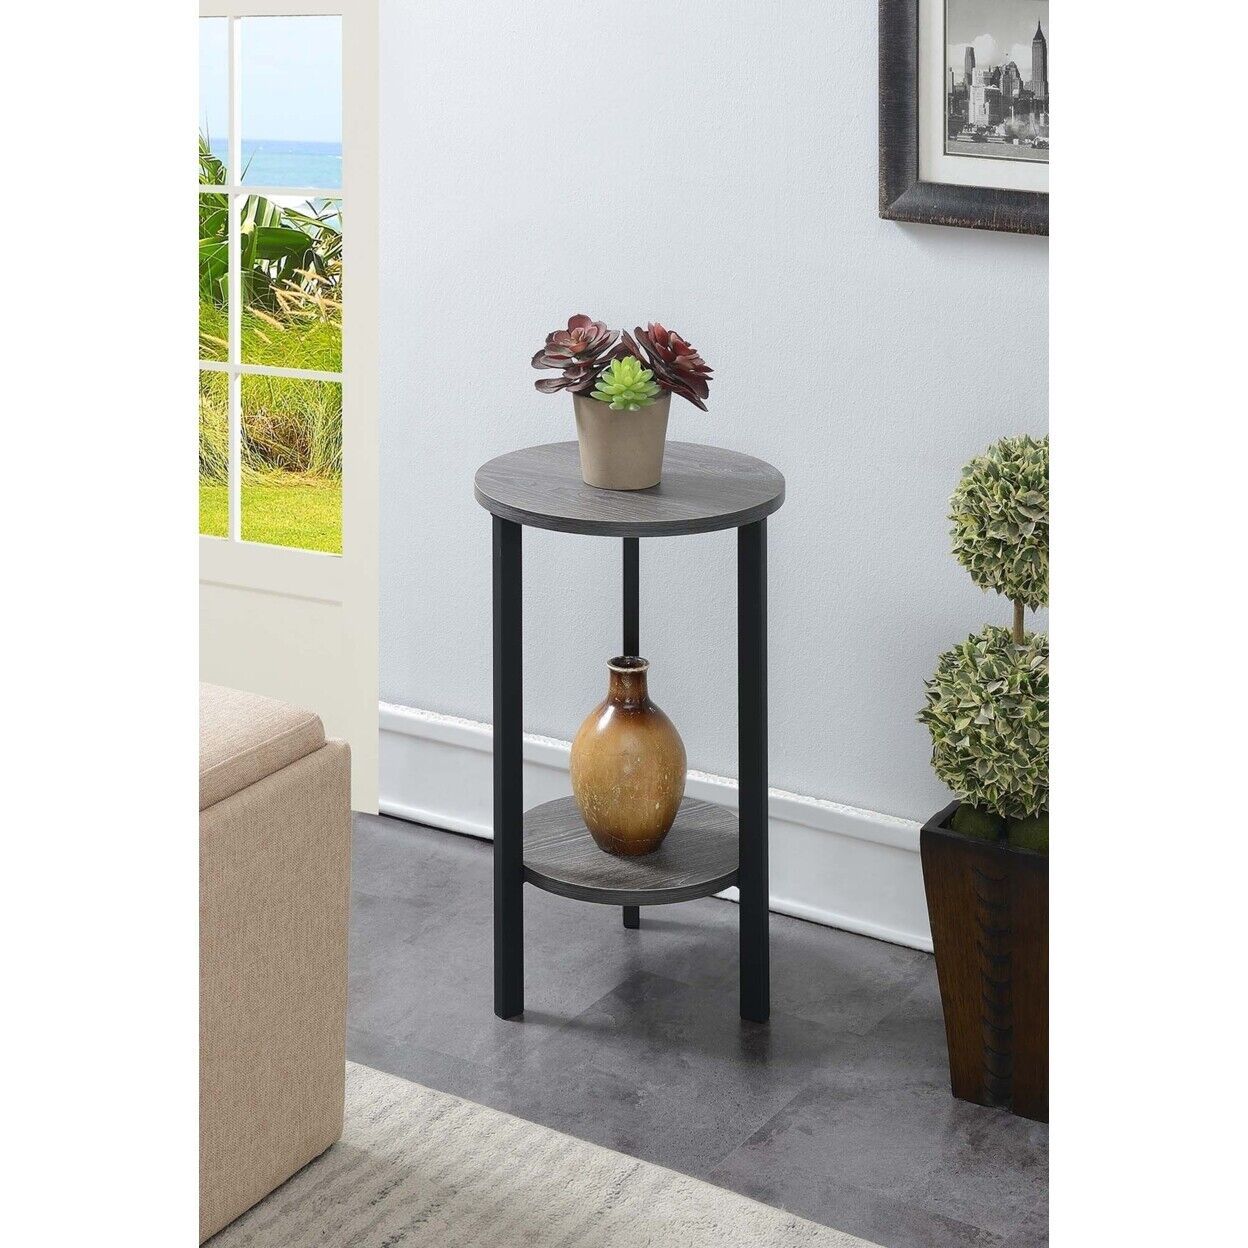 Graystone 24 Inch Plant Stand, Weathered Gray 95285427154 | Ebay With 24 Inch Plant Stands (View 4 of 15)